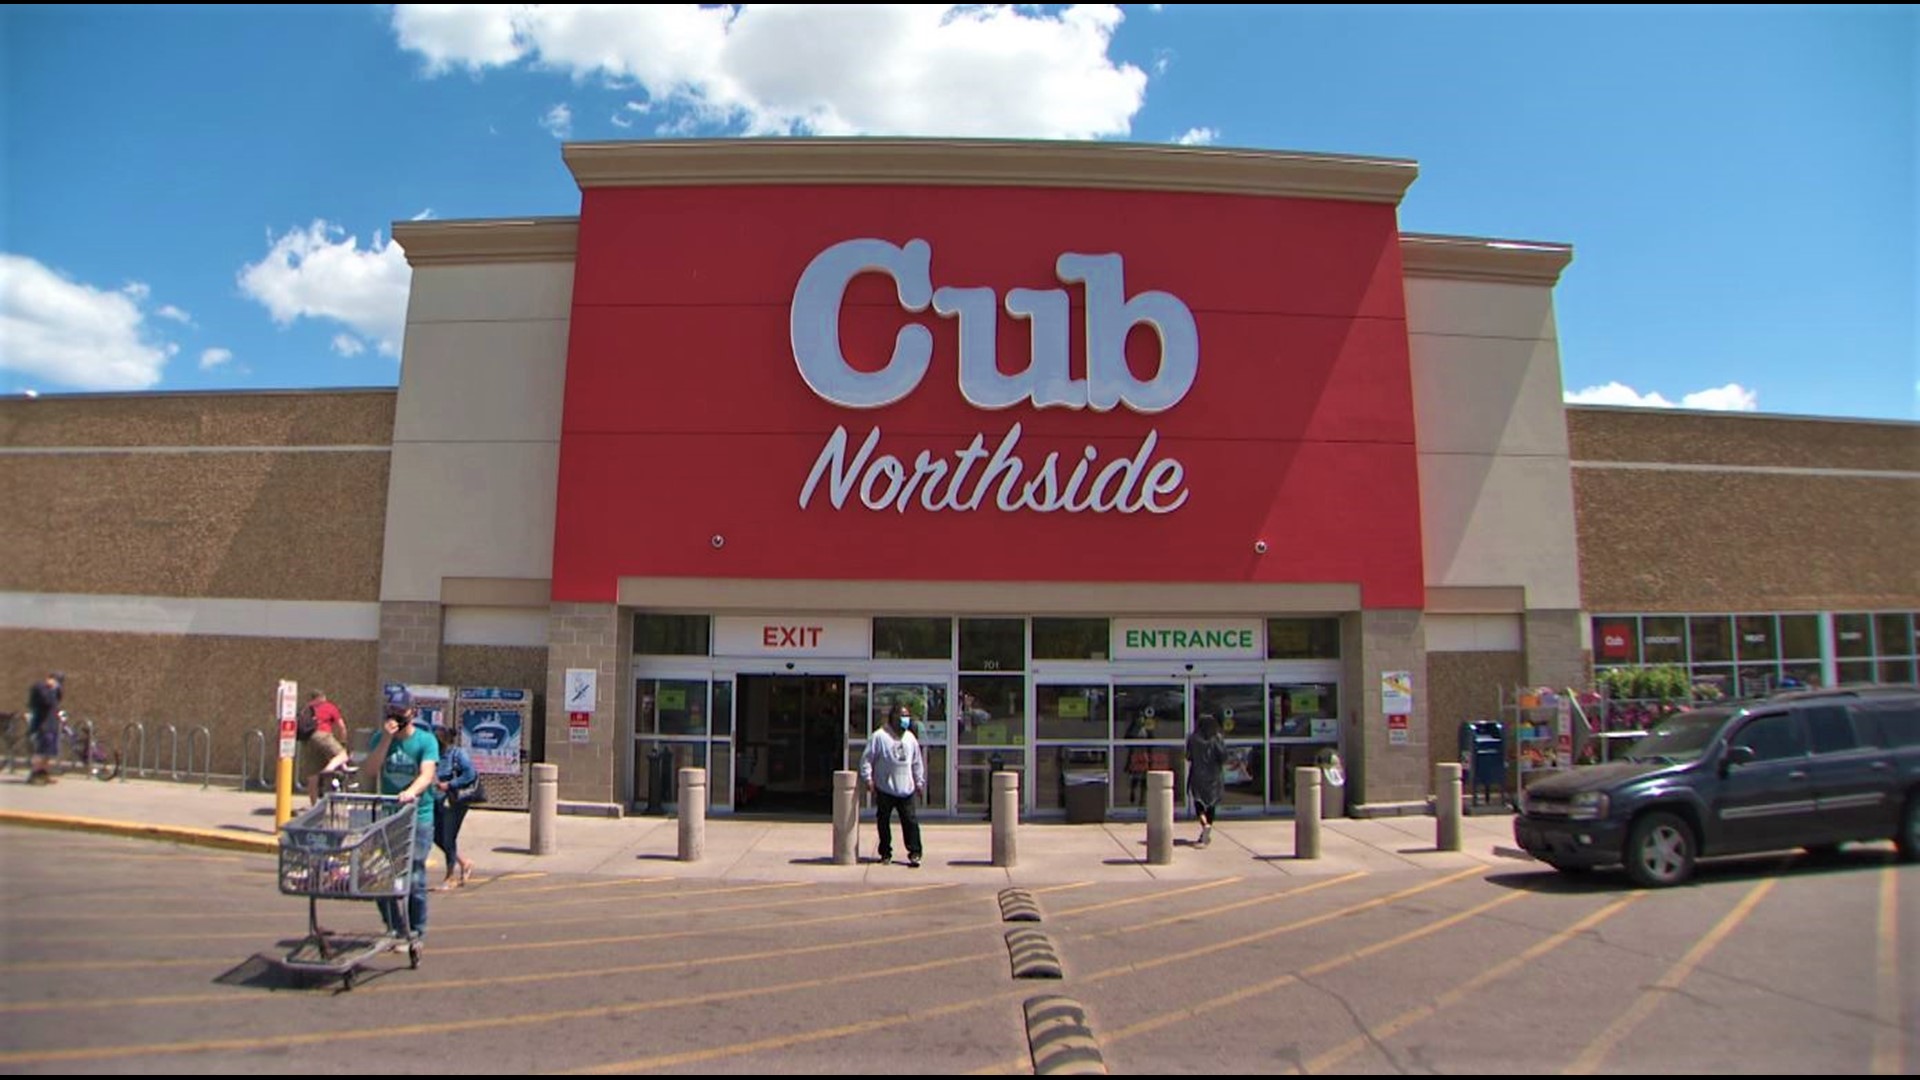 Neighborhood leaders praise Cub's CEO for a community-first approach